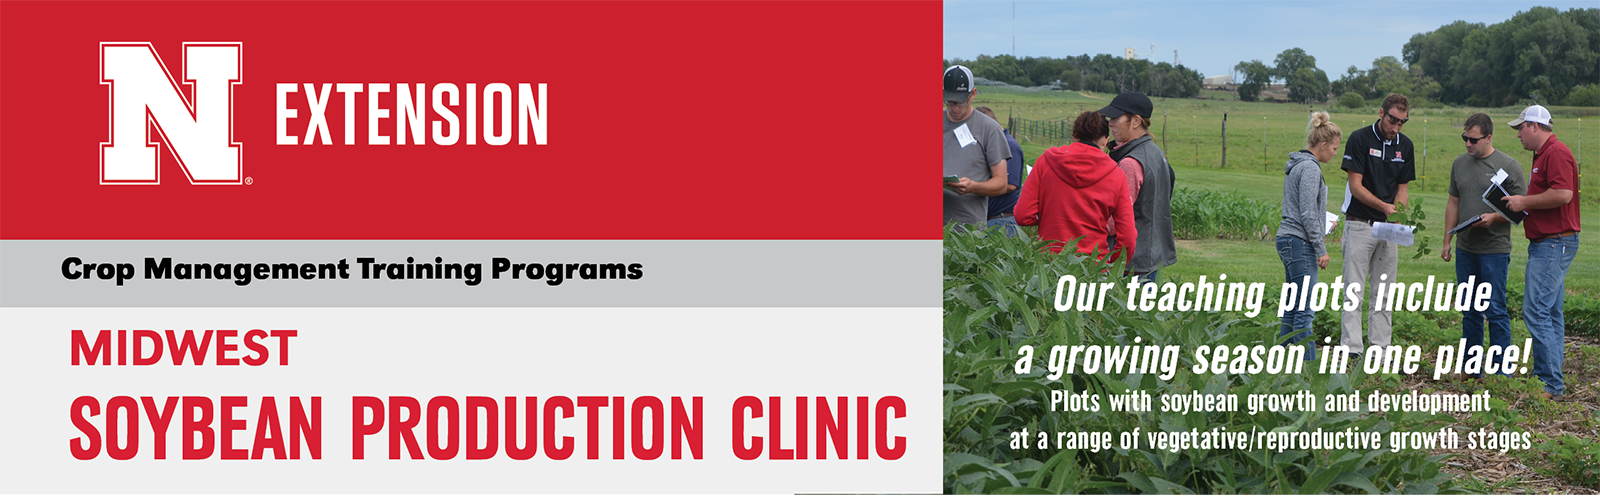 Midwest Soybean Production Training